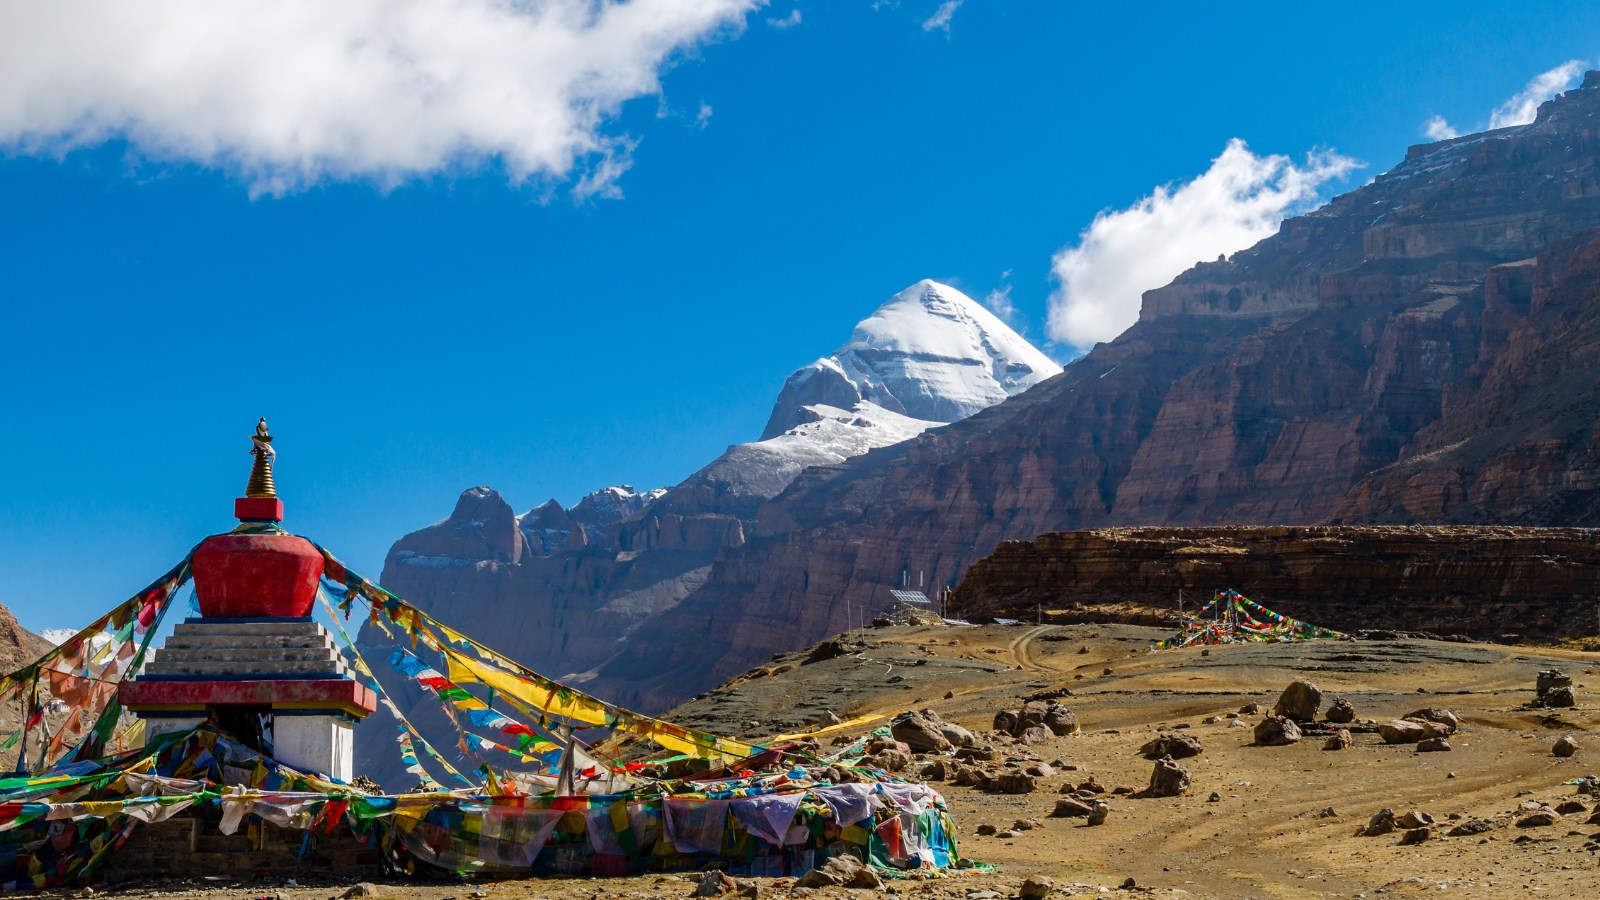 <p>Located in the remote region of western Tibet, Mount Kailash is one of the most intriguing mountain ranges in the Himalayas. The awe-inspiring 6,638 m high peak is considered sacred by five different religions, including Buddhism, Hinduism, Ayyavazhi, Bon (Tibetan folk religion), and Jainism.</p><p>Beyond its spectacular beauty, Mount Kailash is believed to be the center of cosmic energy and a place of spiritual connection and enlightenment. Visitors to Mount Kailash engage in various spiritual practices for inner reflection and spiritual growth.</p>